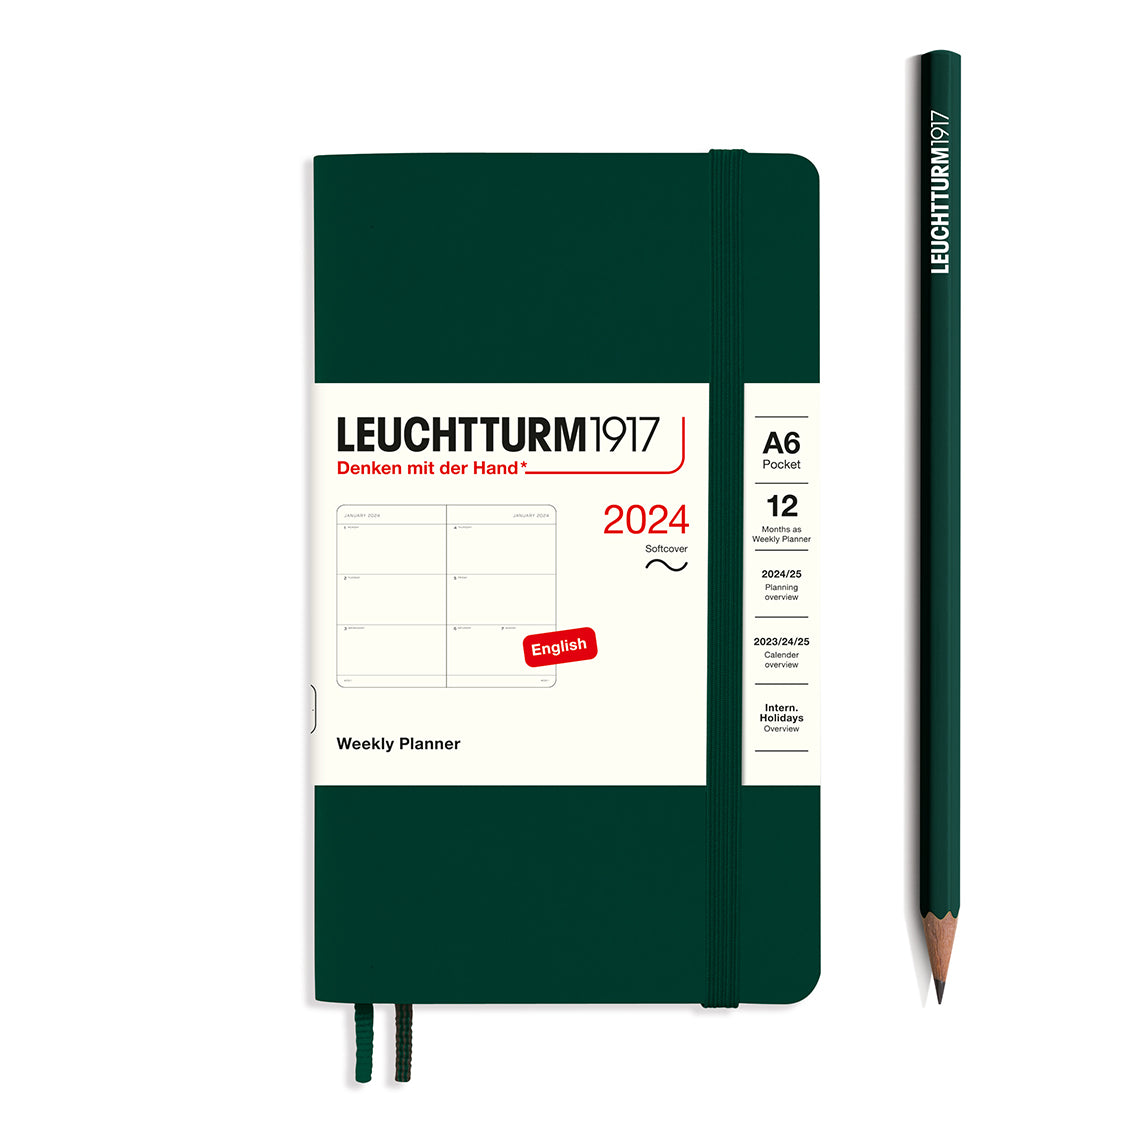 An image of a dark green planner with a dark green elastic band holding it together and a cream paper wrap around the middle stating the business name Leuchtturm1917, that it is for the year 2024, it is a weekly planner, is A6 in size and an English language version. It has an image on the wrap showing the inside layout which is a week across 2 pages. A dark green pencil is shown at the side of the planner.